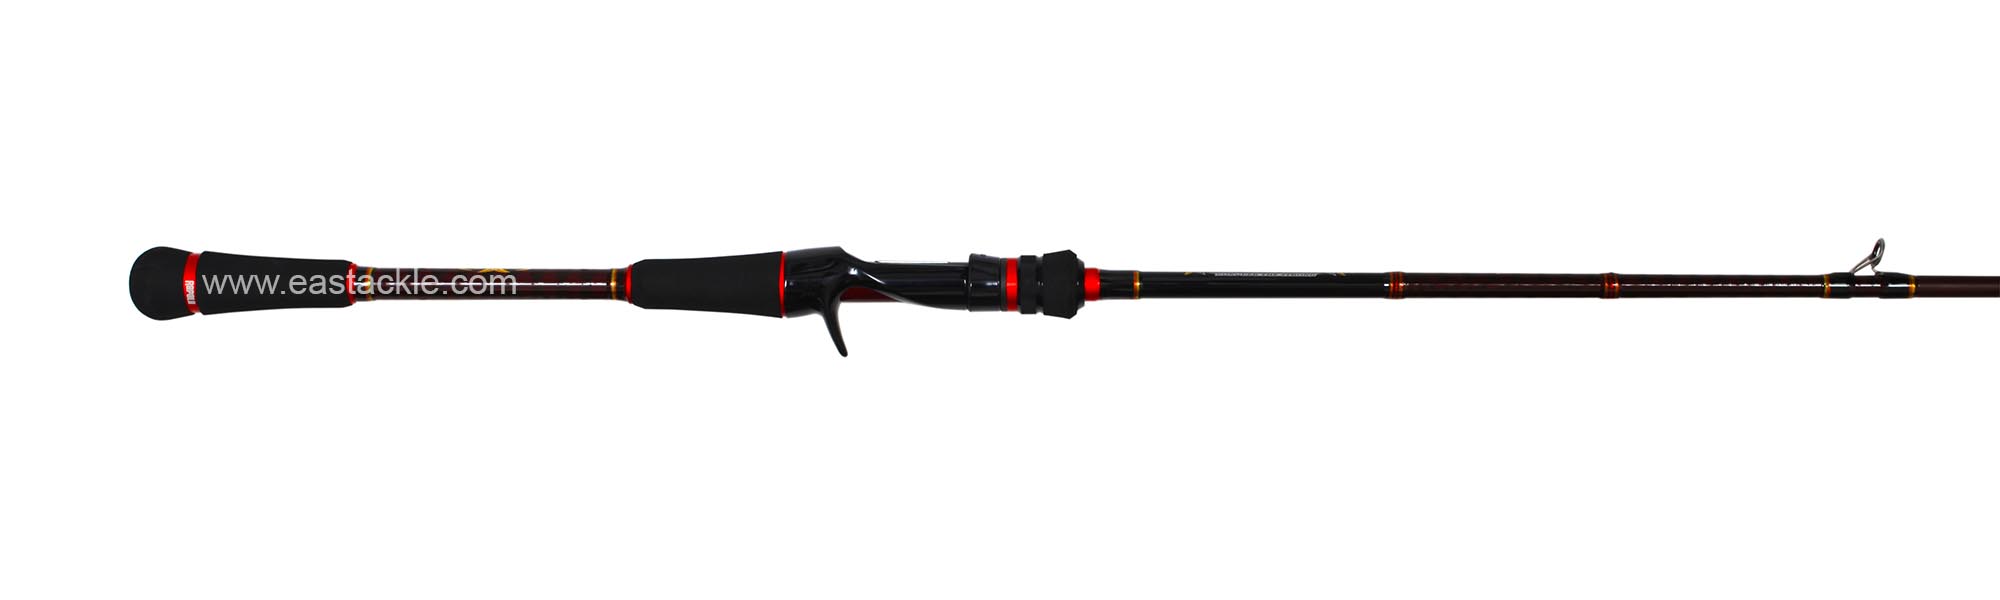  Rapala - 2018 Rapalero - RRC661XH - Bait Casting Rod - Butt to Stripper Guide (Side View) | Eastackle